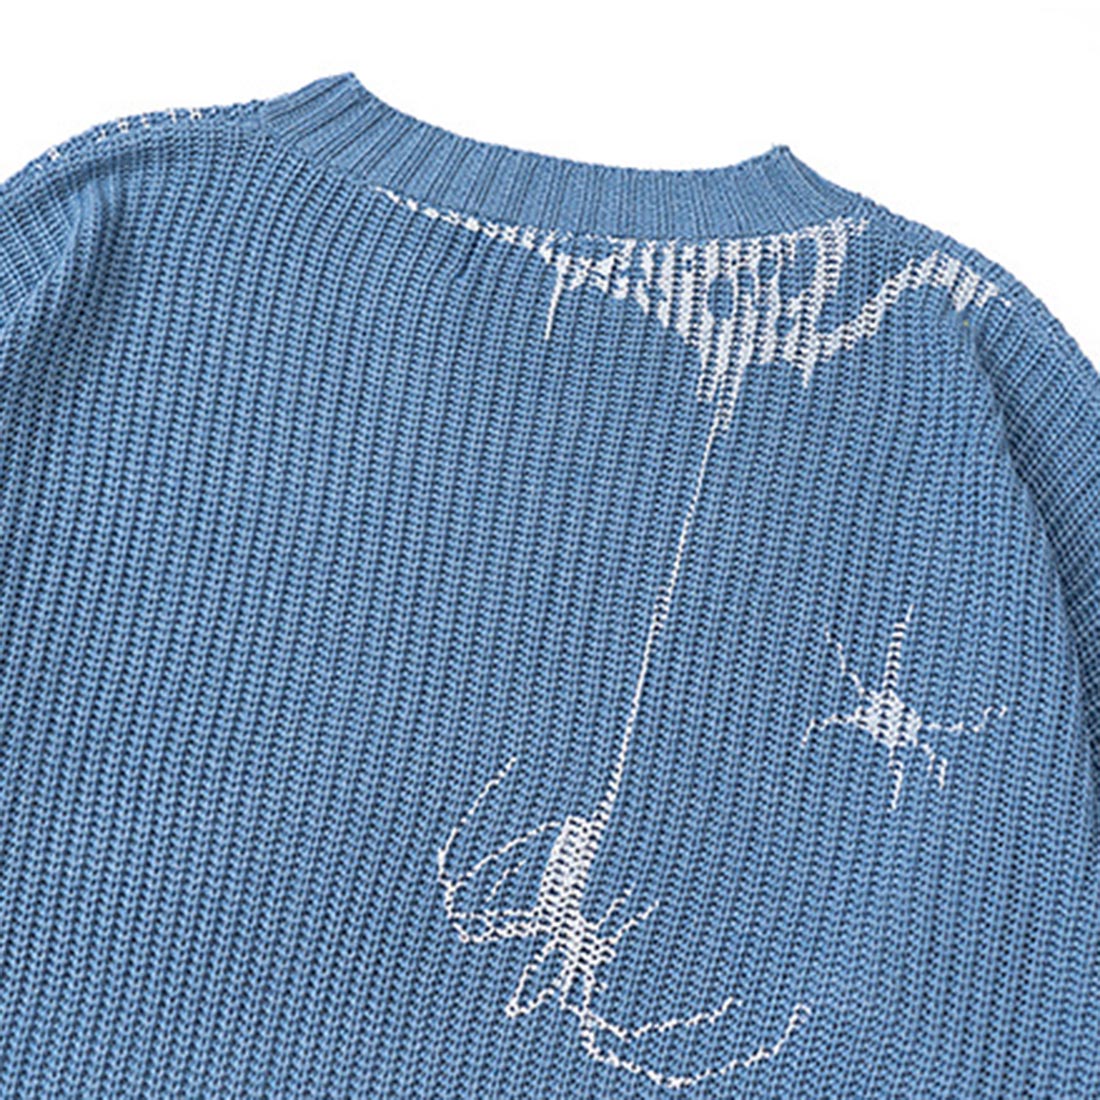 SPIDER PRINT DAMAGED KNITTED SWEATER